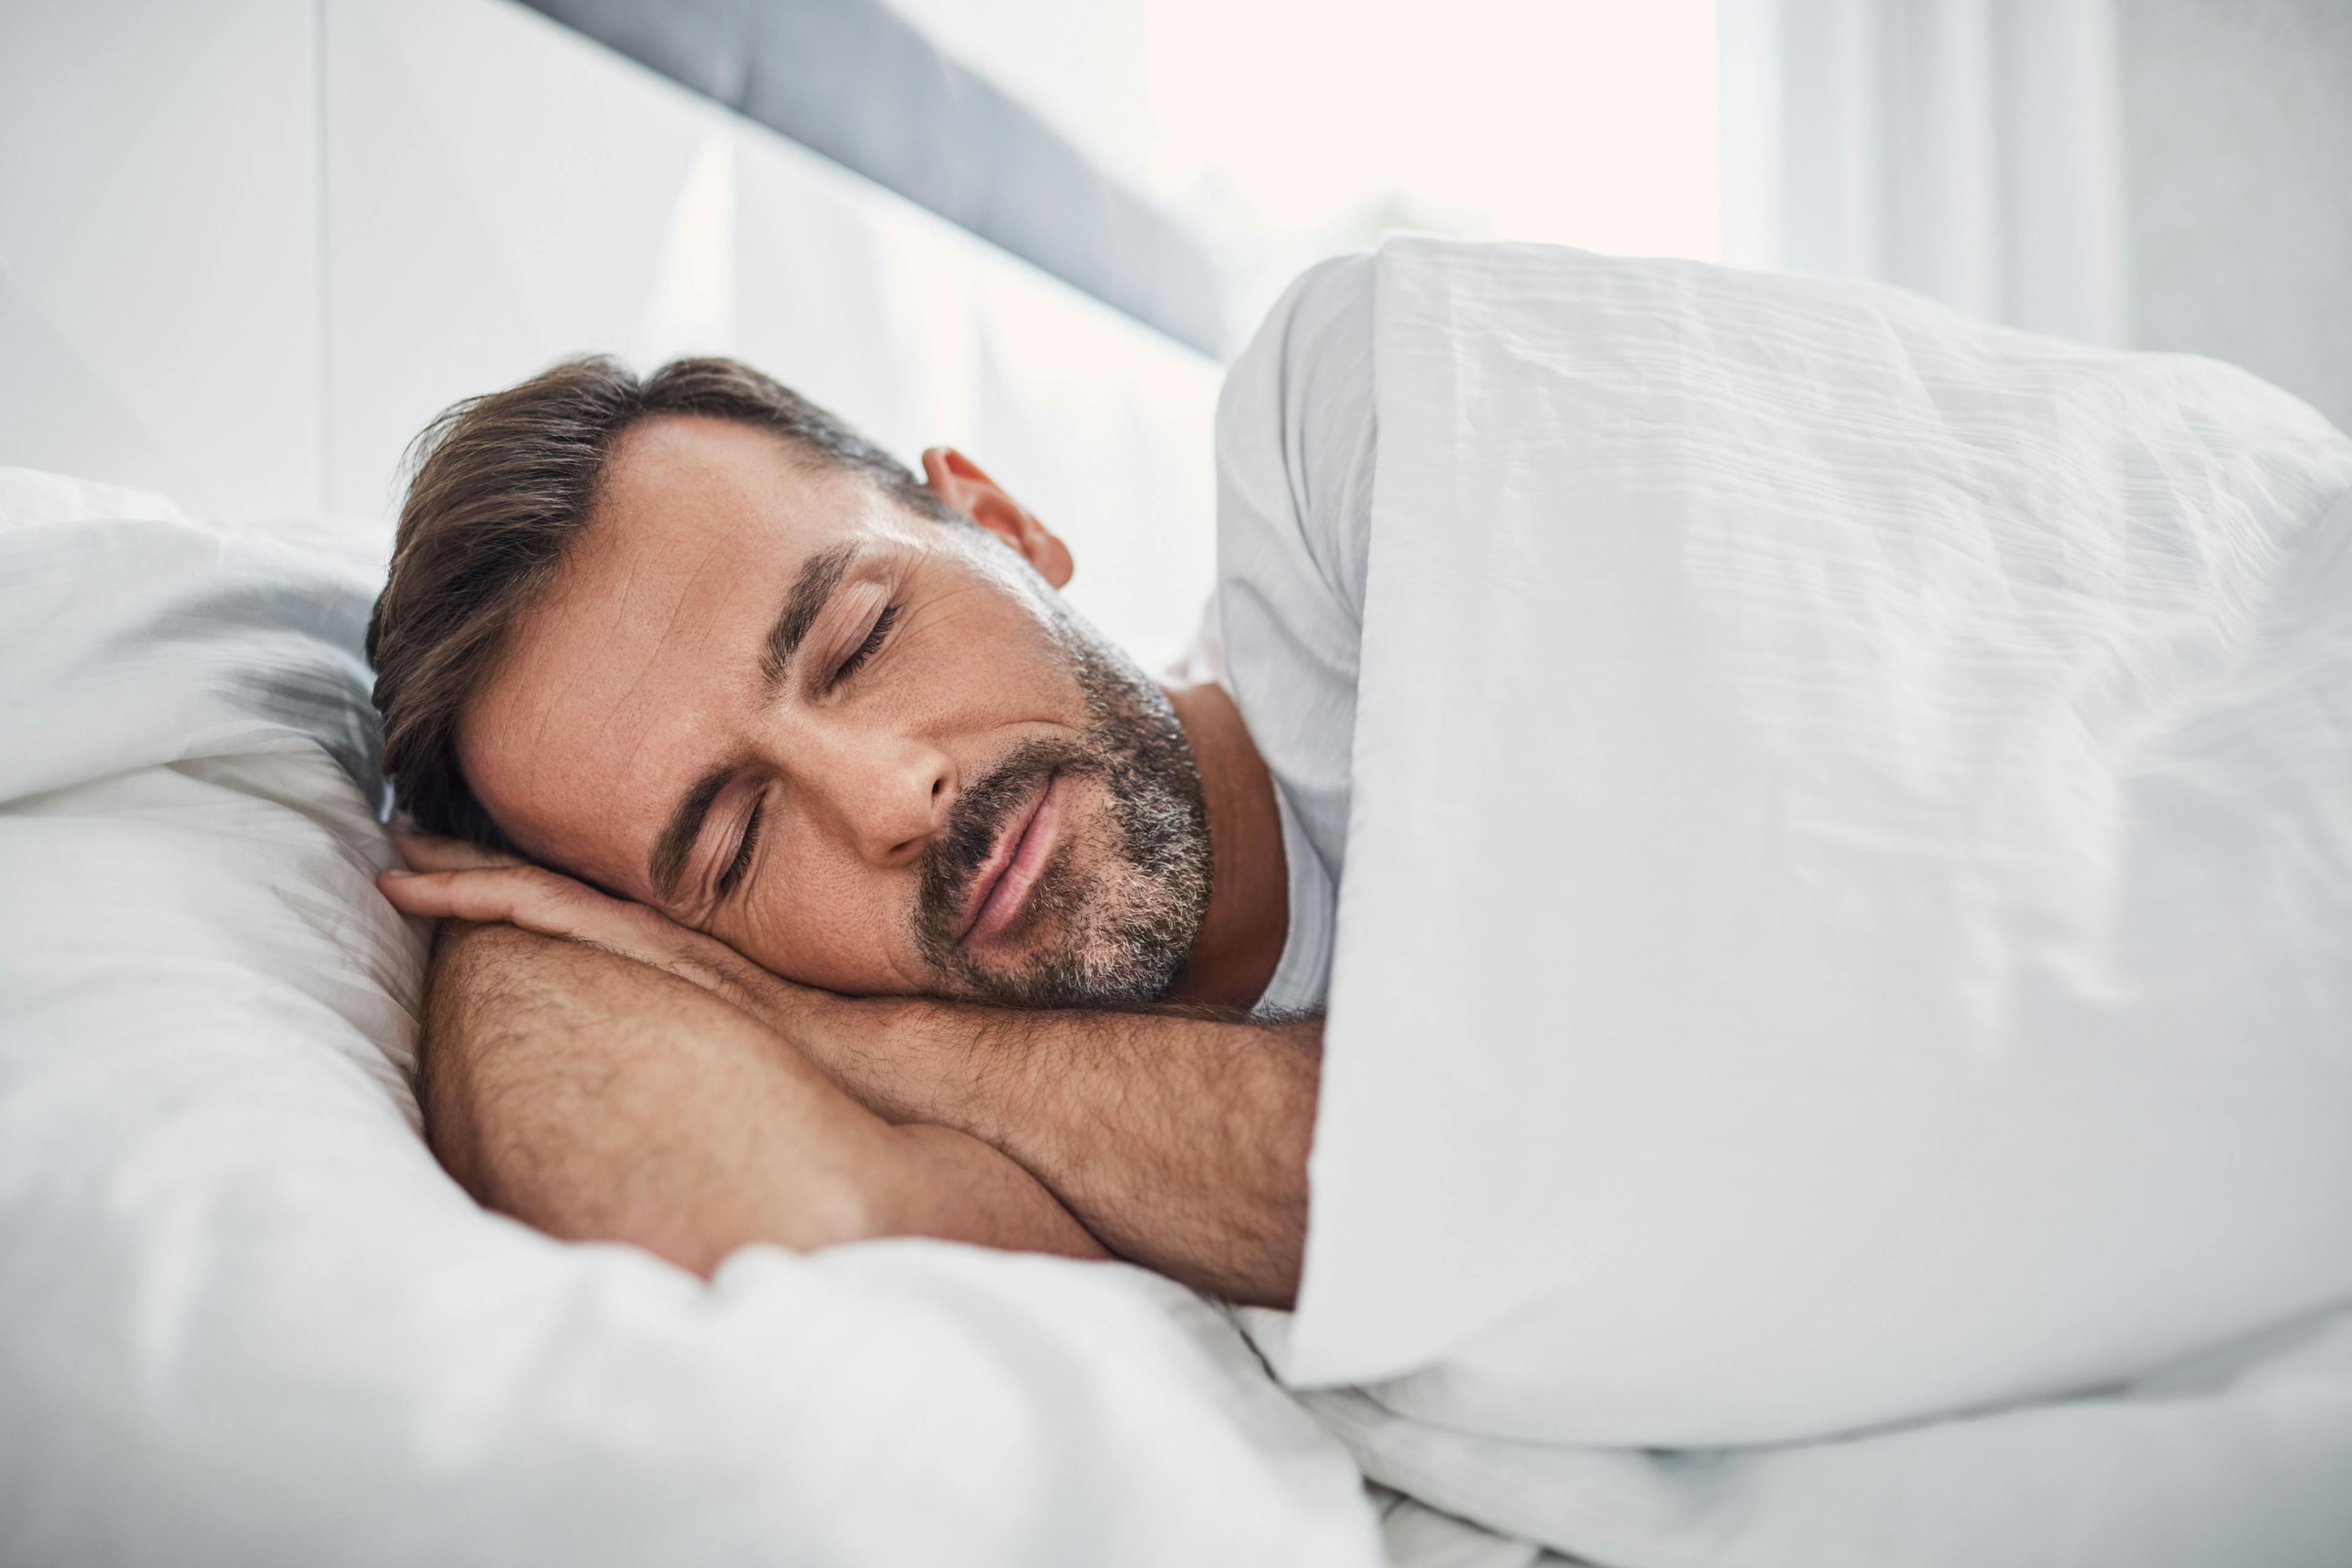 New Study Ties Sleep Loss to Overactive Immune System